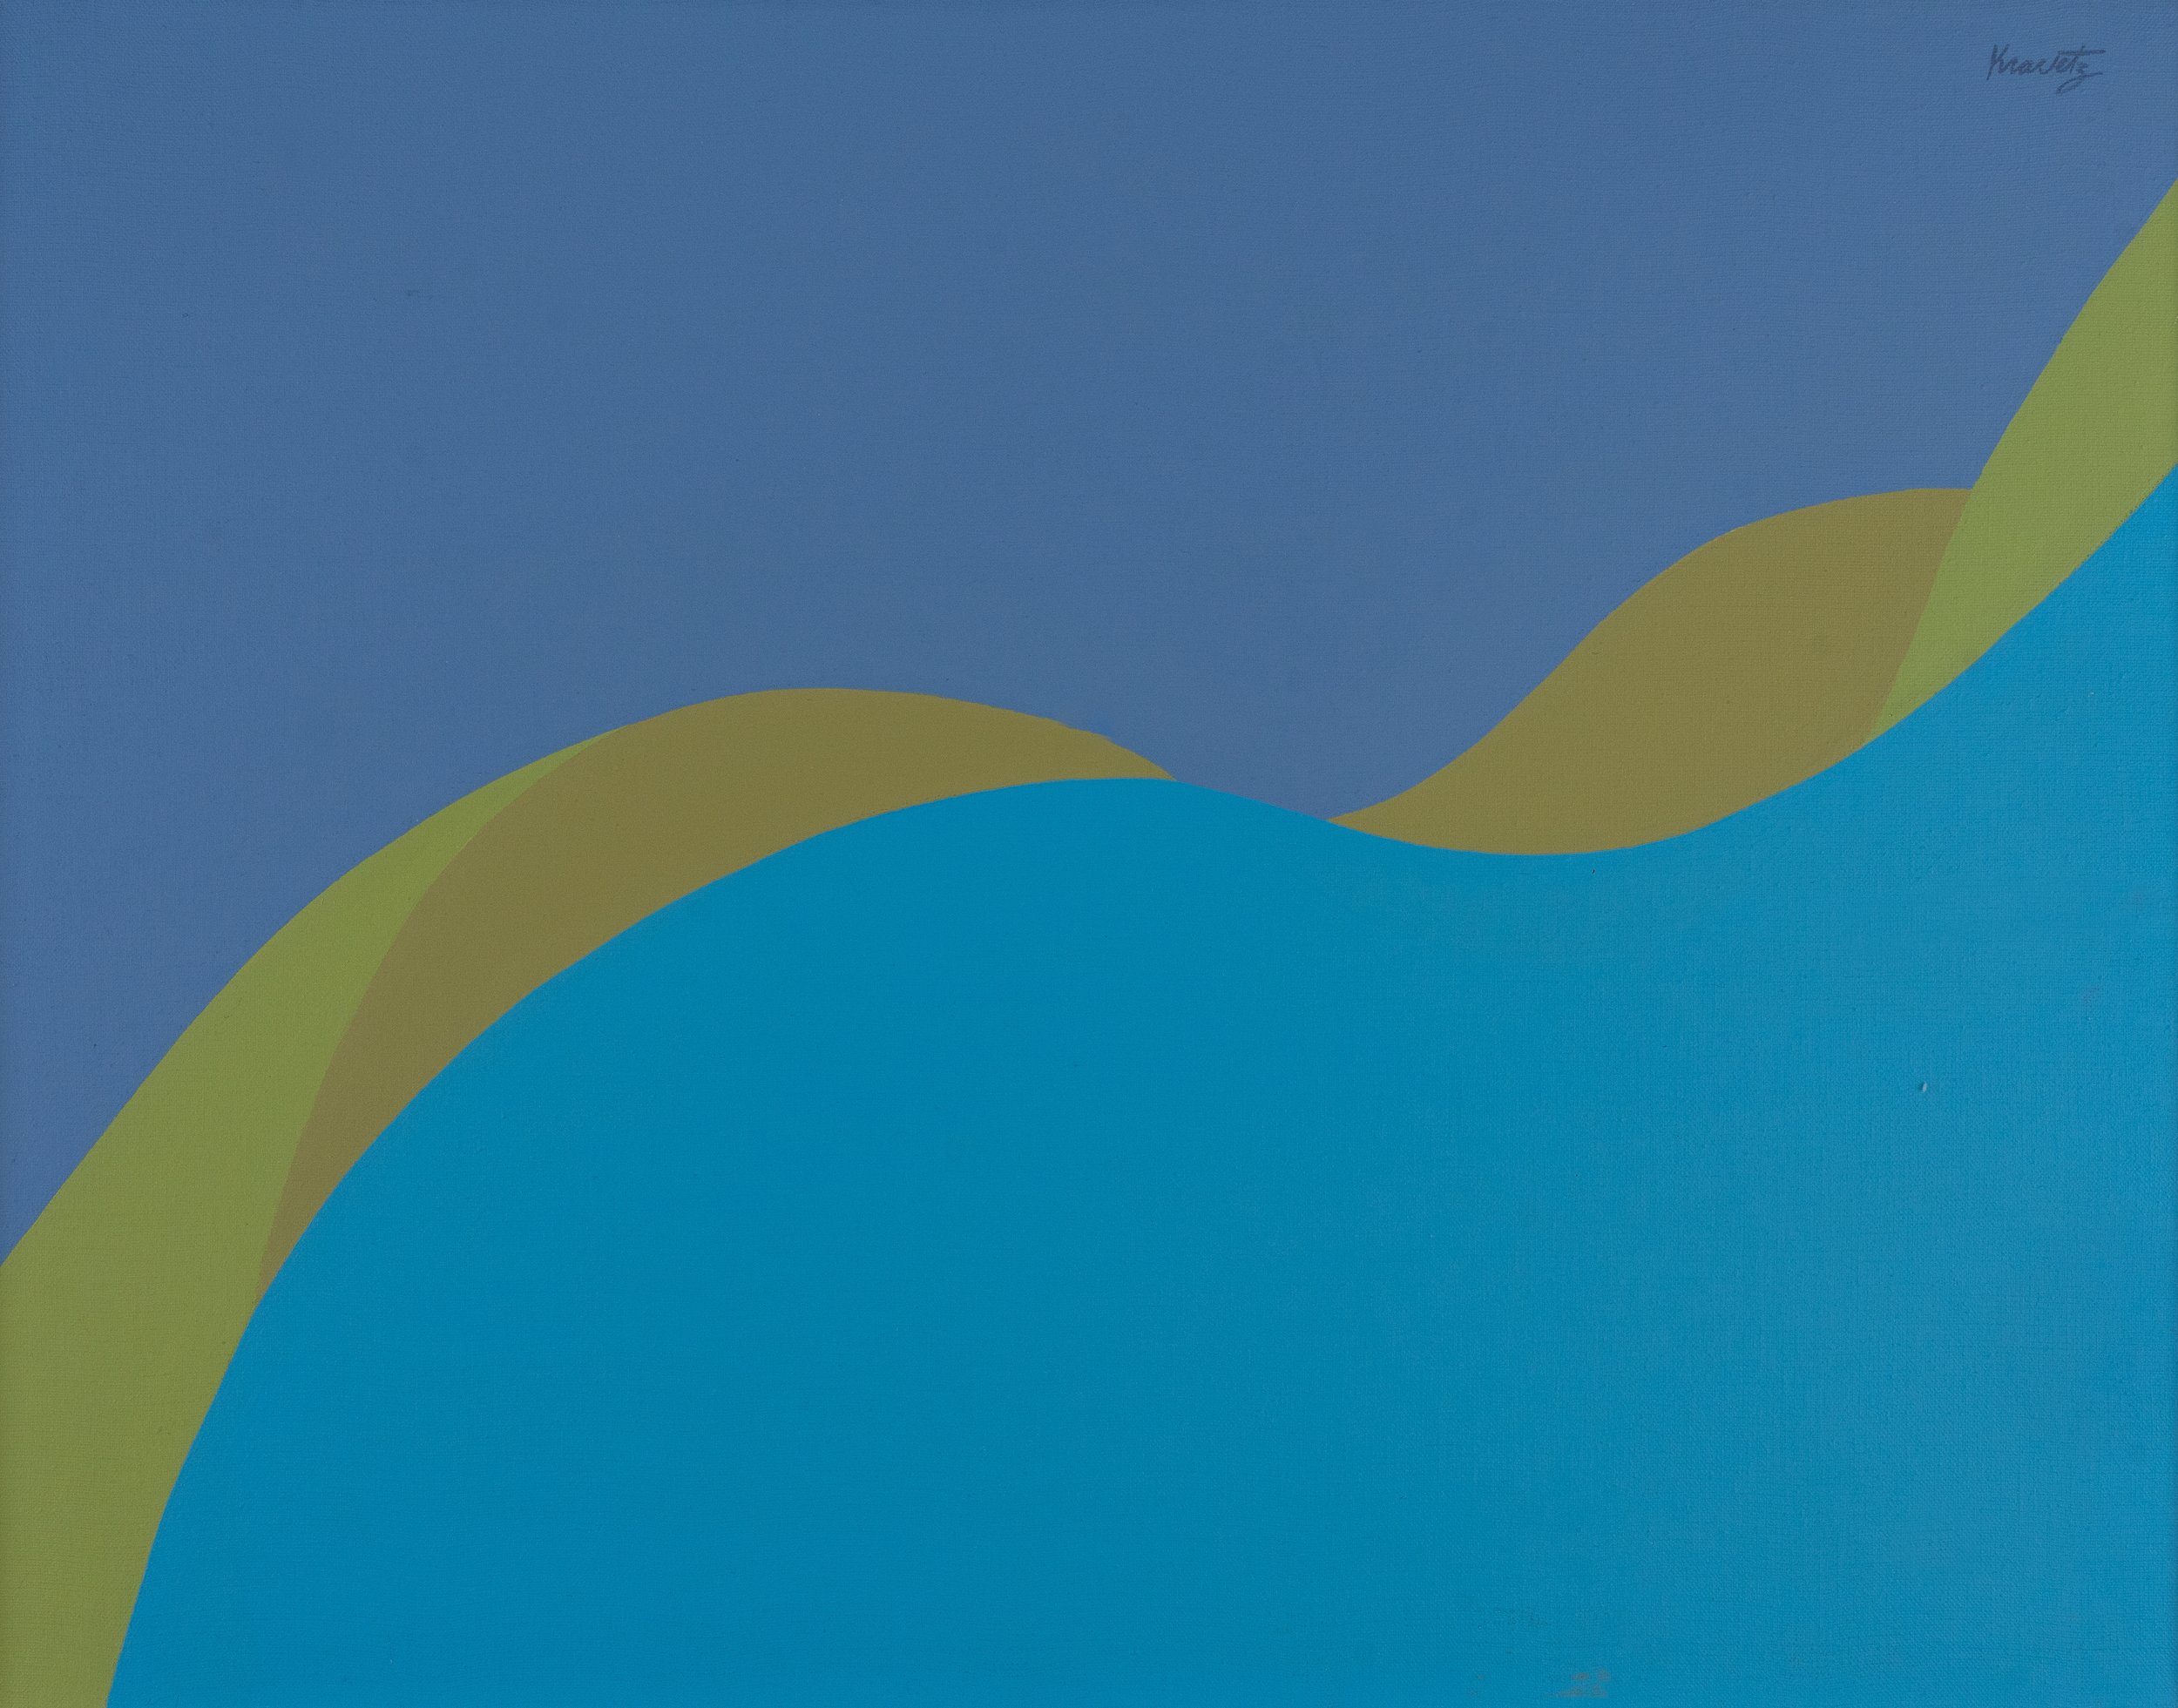 Curves and Slopes, 1990, acrylic on canvas, 23x29 inches